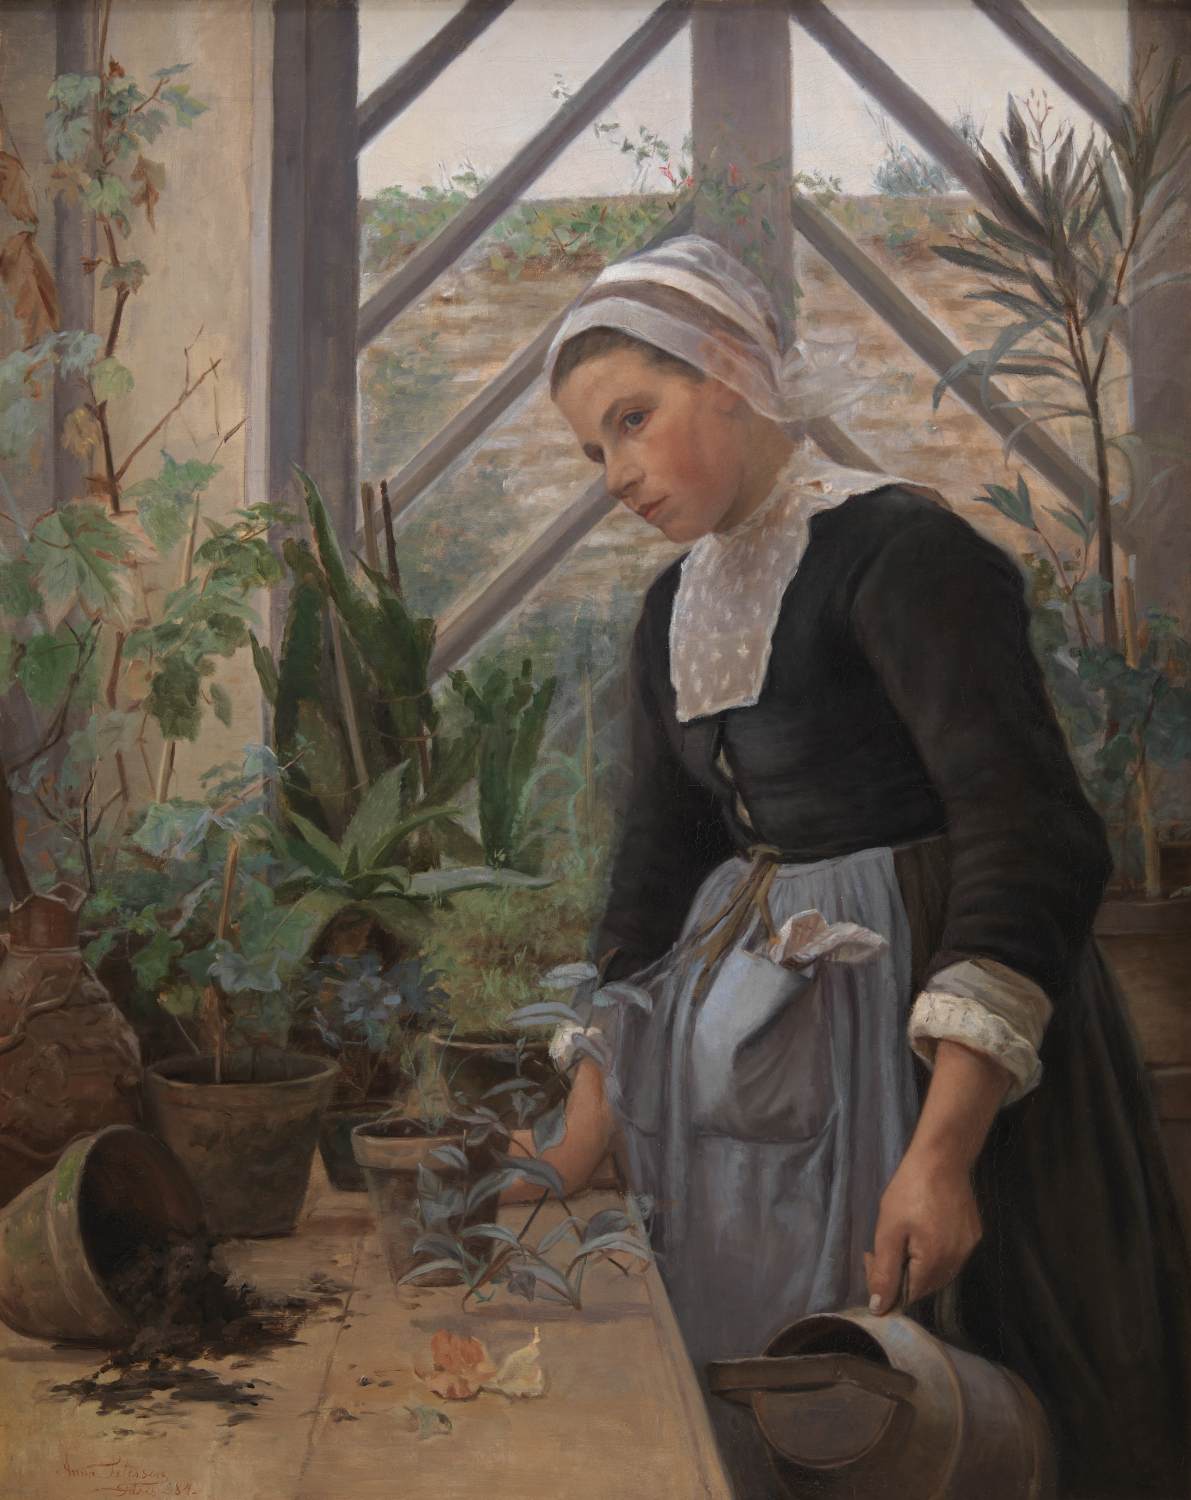 Breton Girl Taking Care of Plants in the Greenhouse